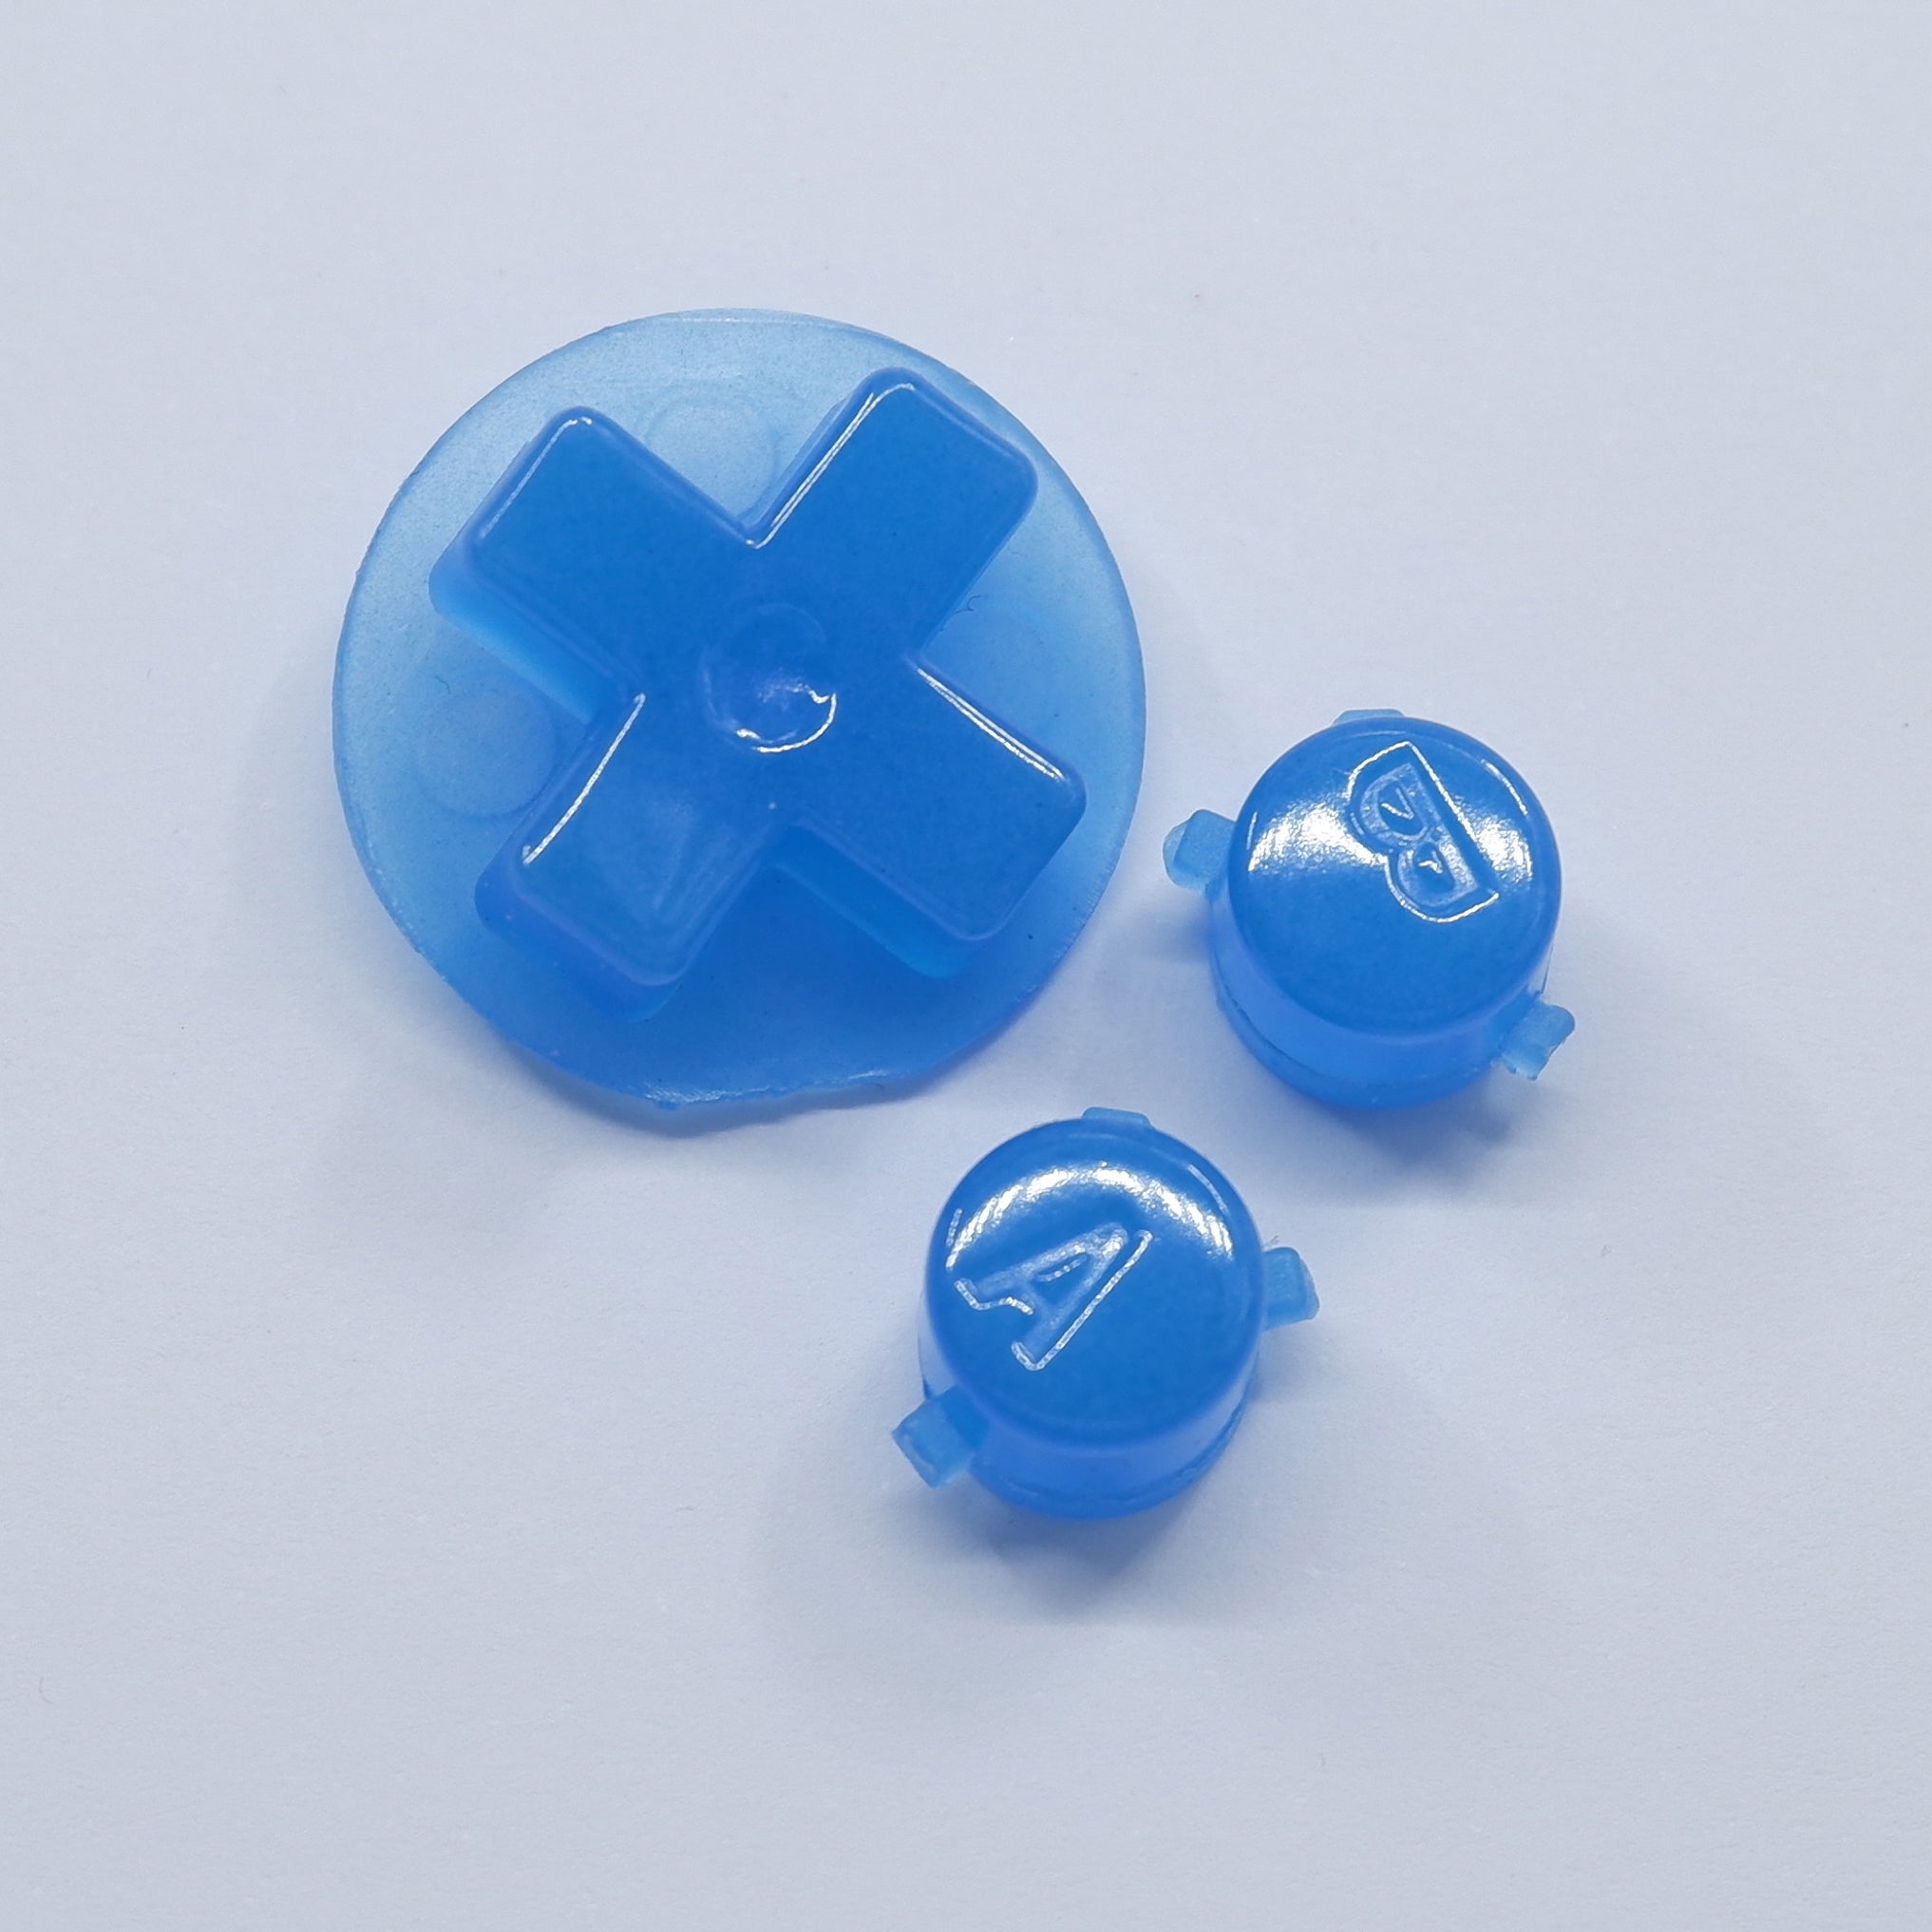 Pocket Rocks Buttons For Game Boy Advance GBA